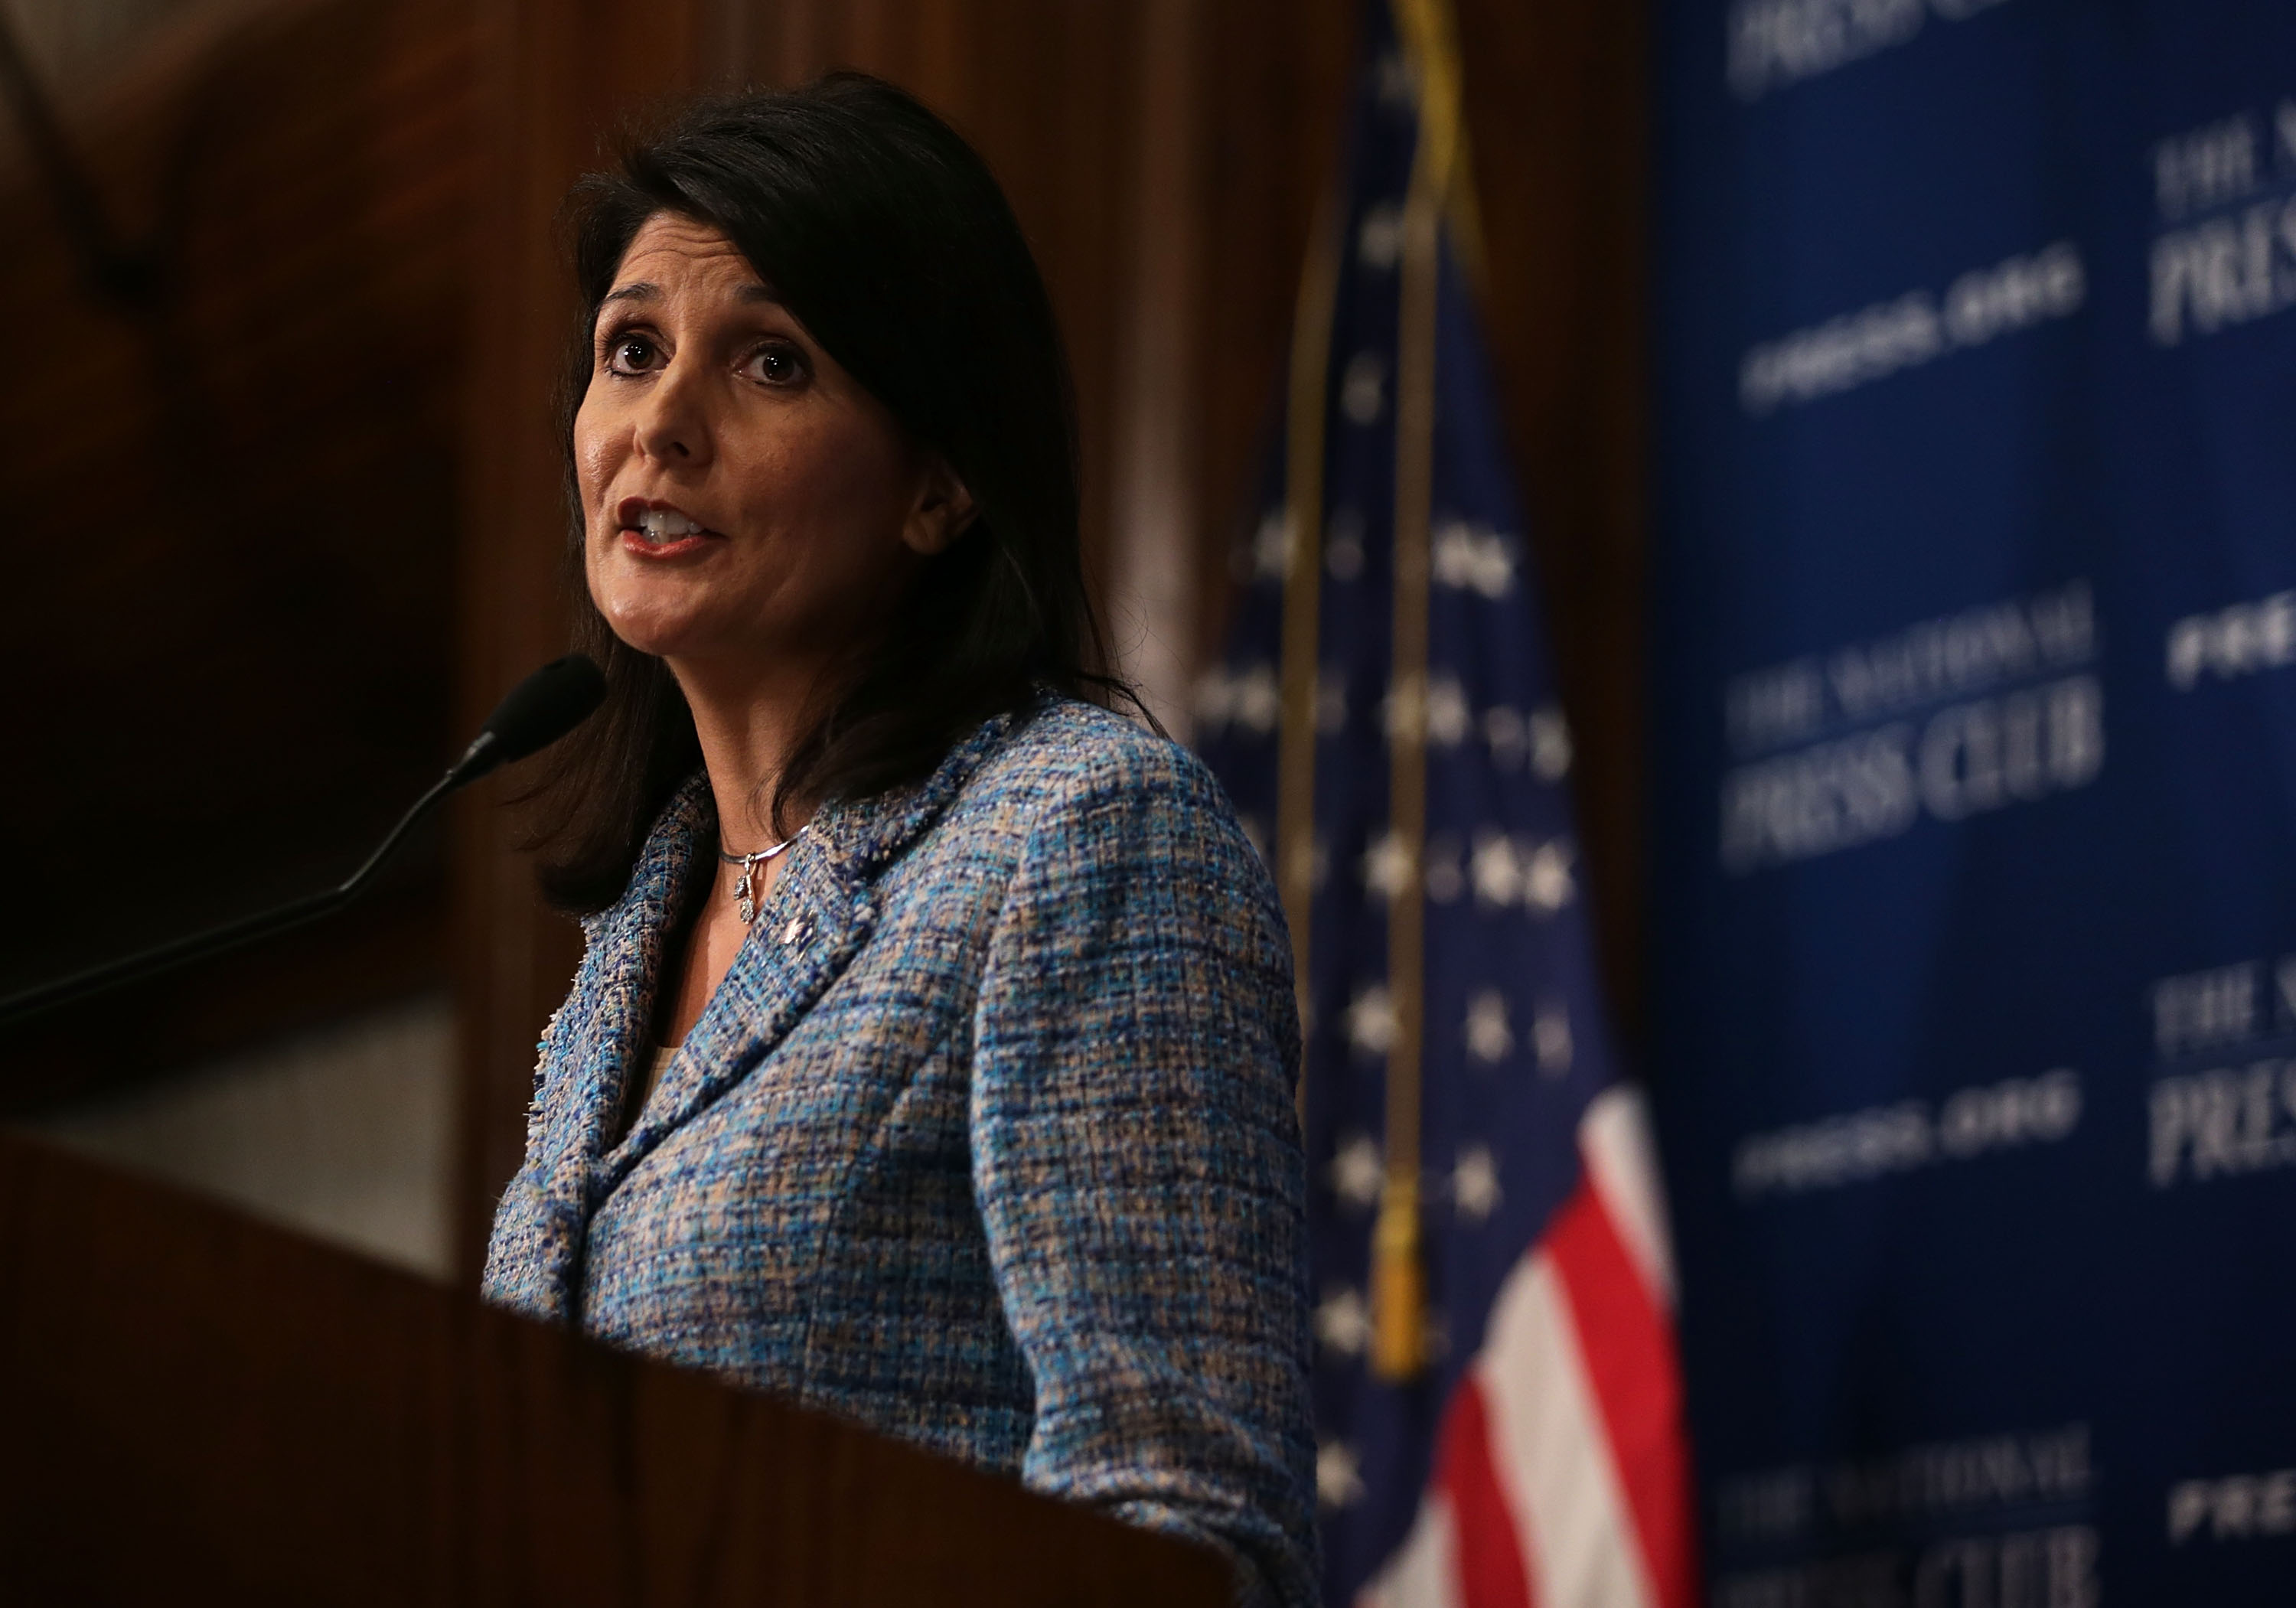 South Carolina Governor Nikki Haley addresses a Newsmaker Luncheon at the National Press Club September 2, 2015 in Washington, DC. Governor Haley spoke on "Lessons from the New South." (Alex Wong—Getty Images)